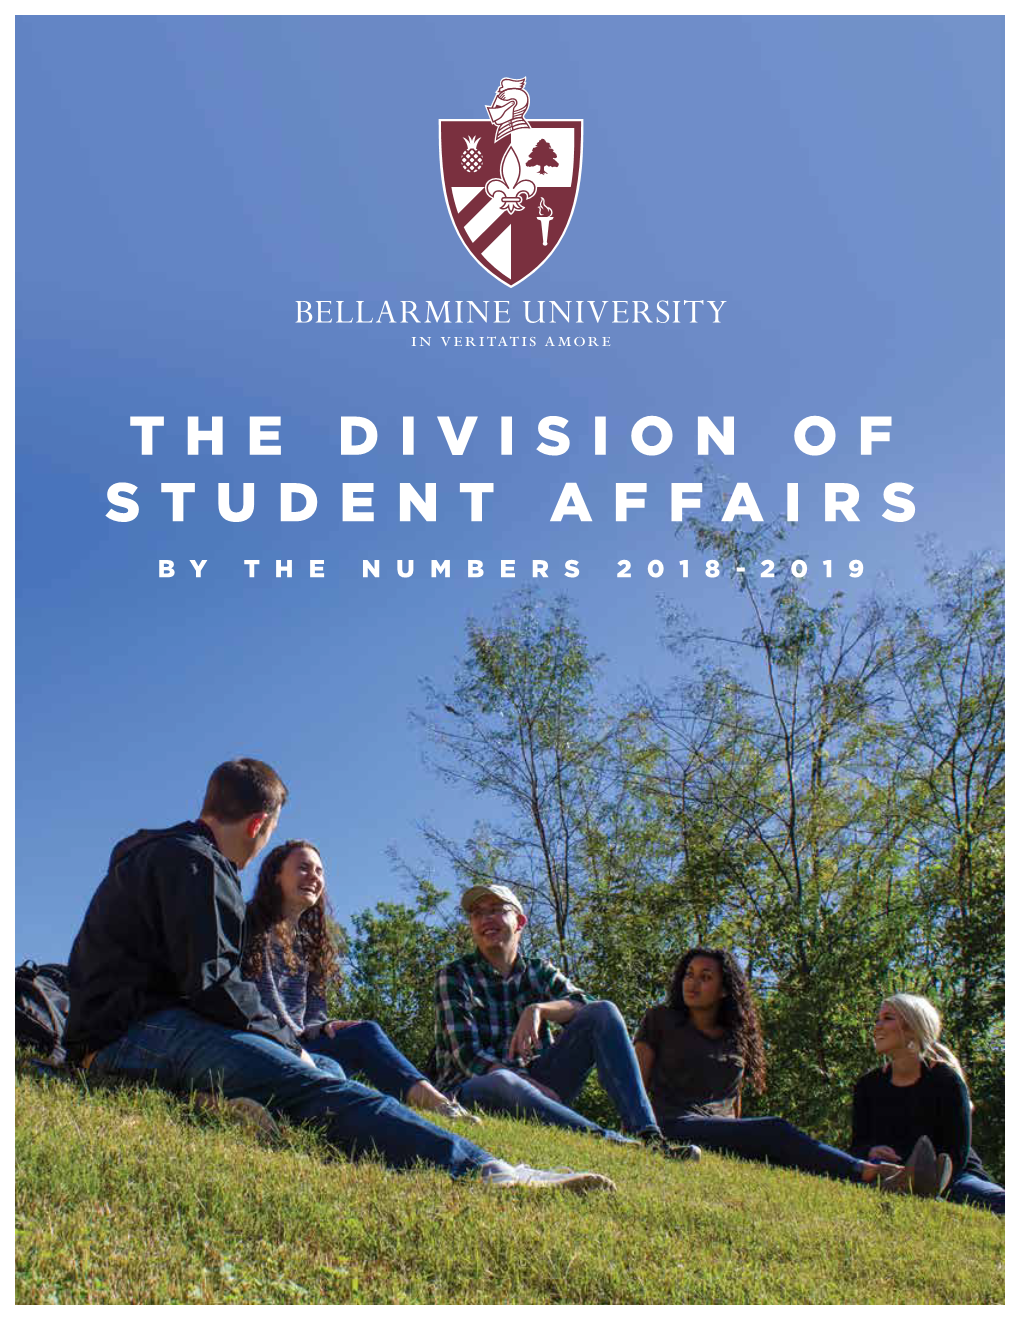 The Division of Student Affairs by the Numbers 2018-2019 Dear Friends and Colleagues